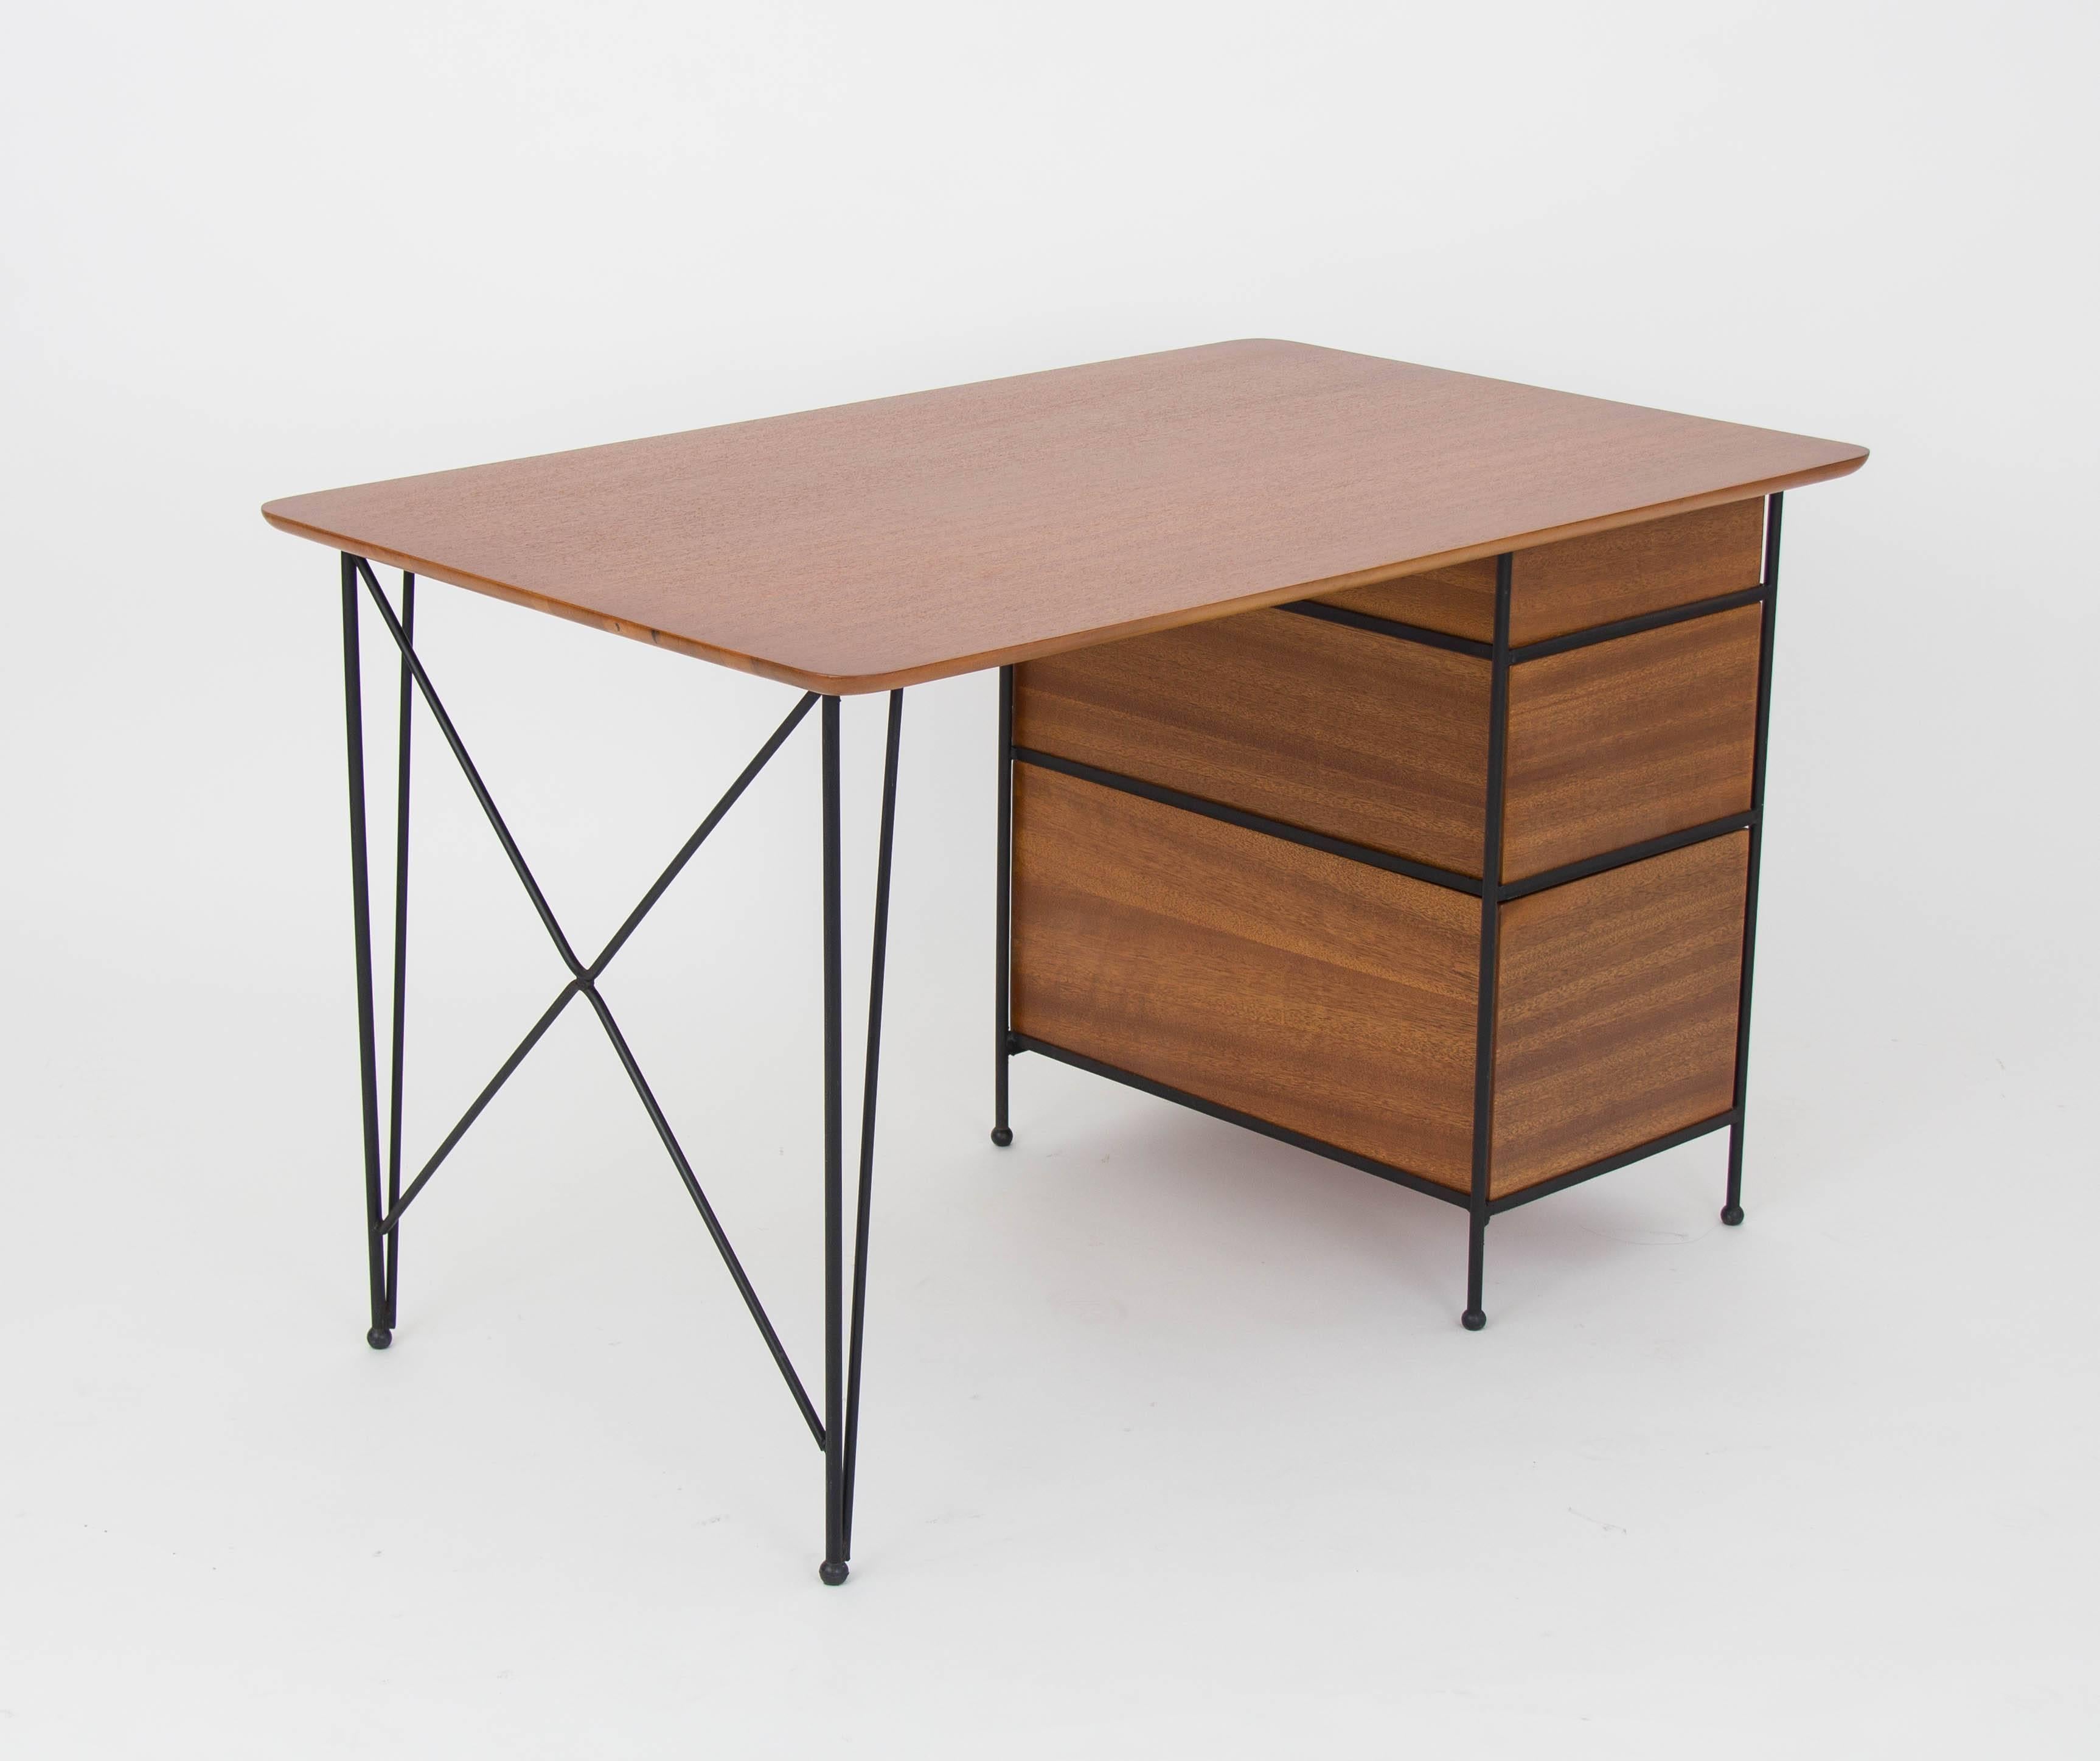 Modernist Desk in Mahogany and Enameled Steel by Vista of California 2